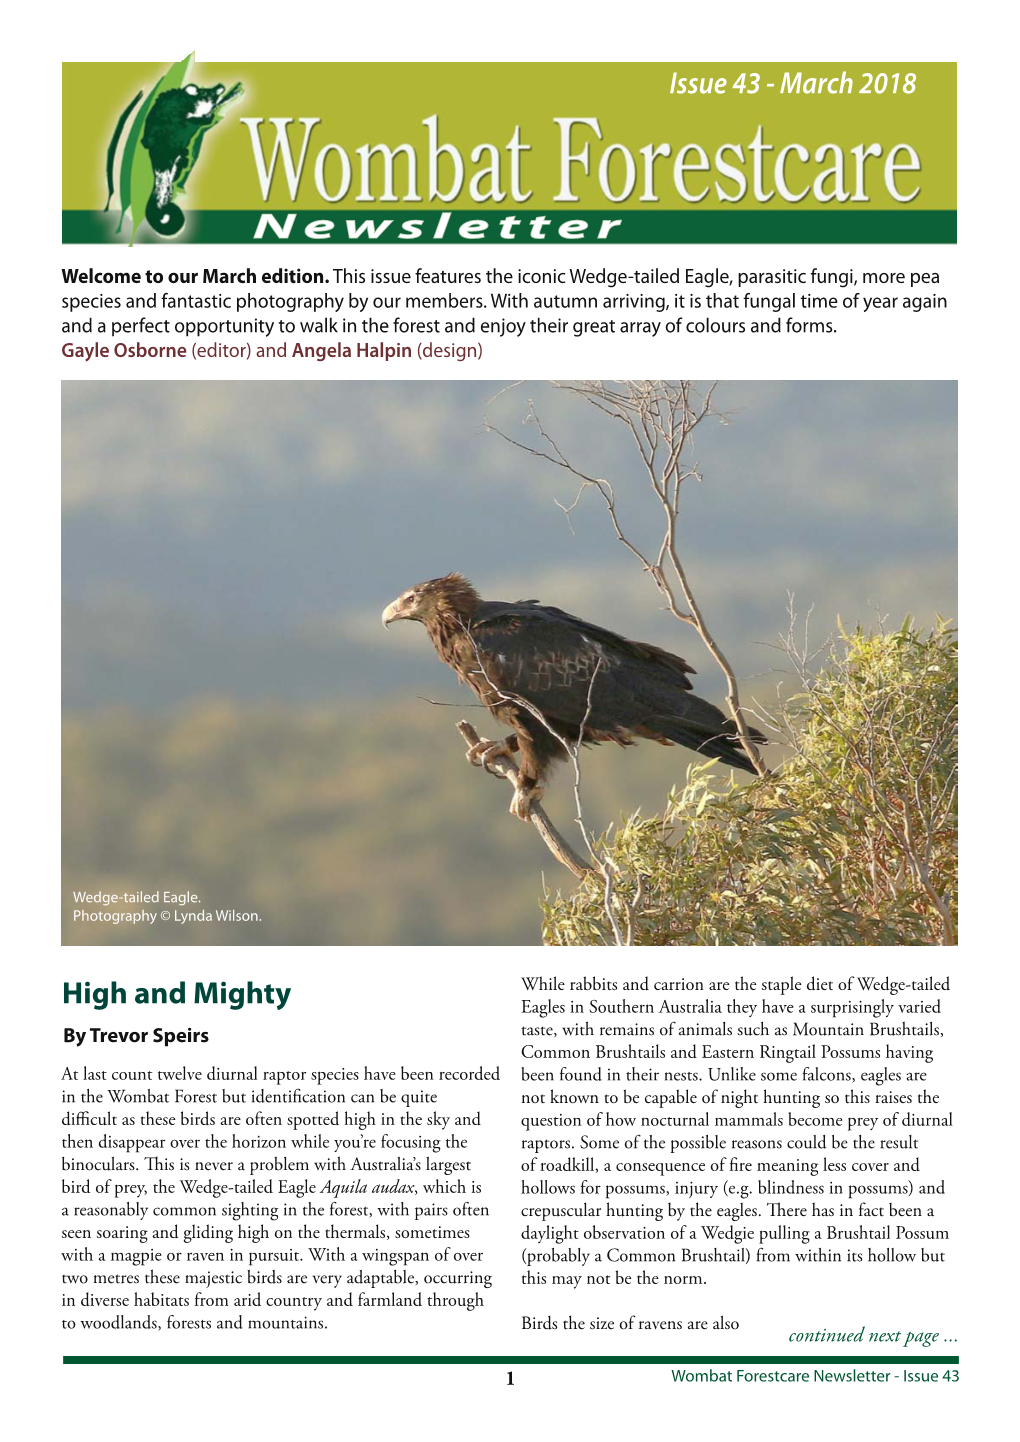 Wombat Forestcare Newsletter - Issue 43 Massive Stick Nest with Young Wedge-Tailed Eagle